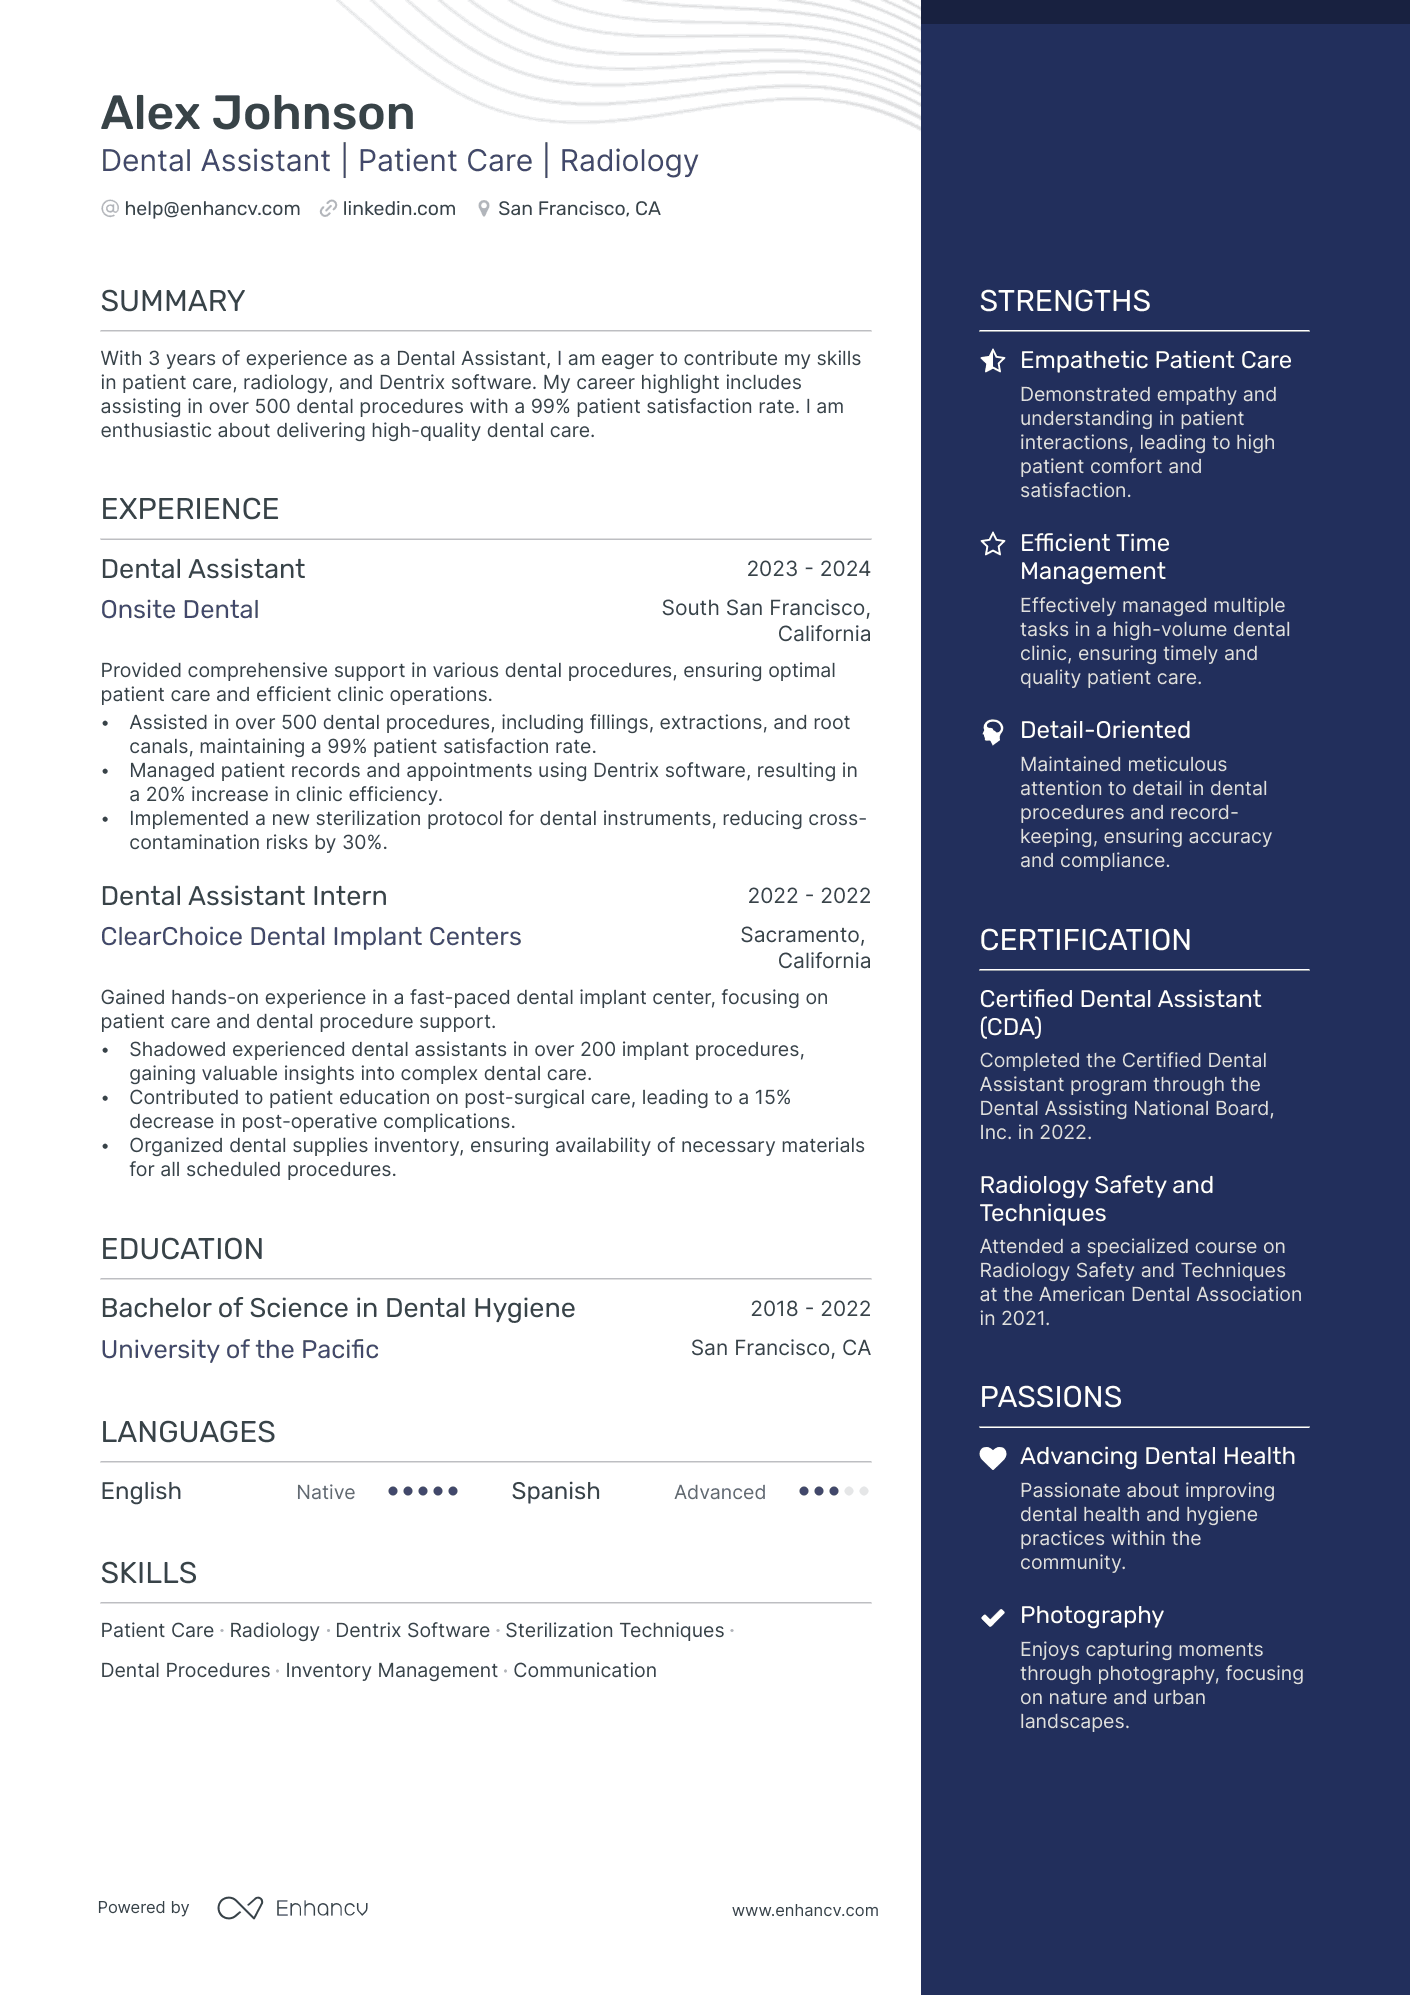 Dental Assistant | Patient Care | Radiology resume example